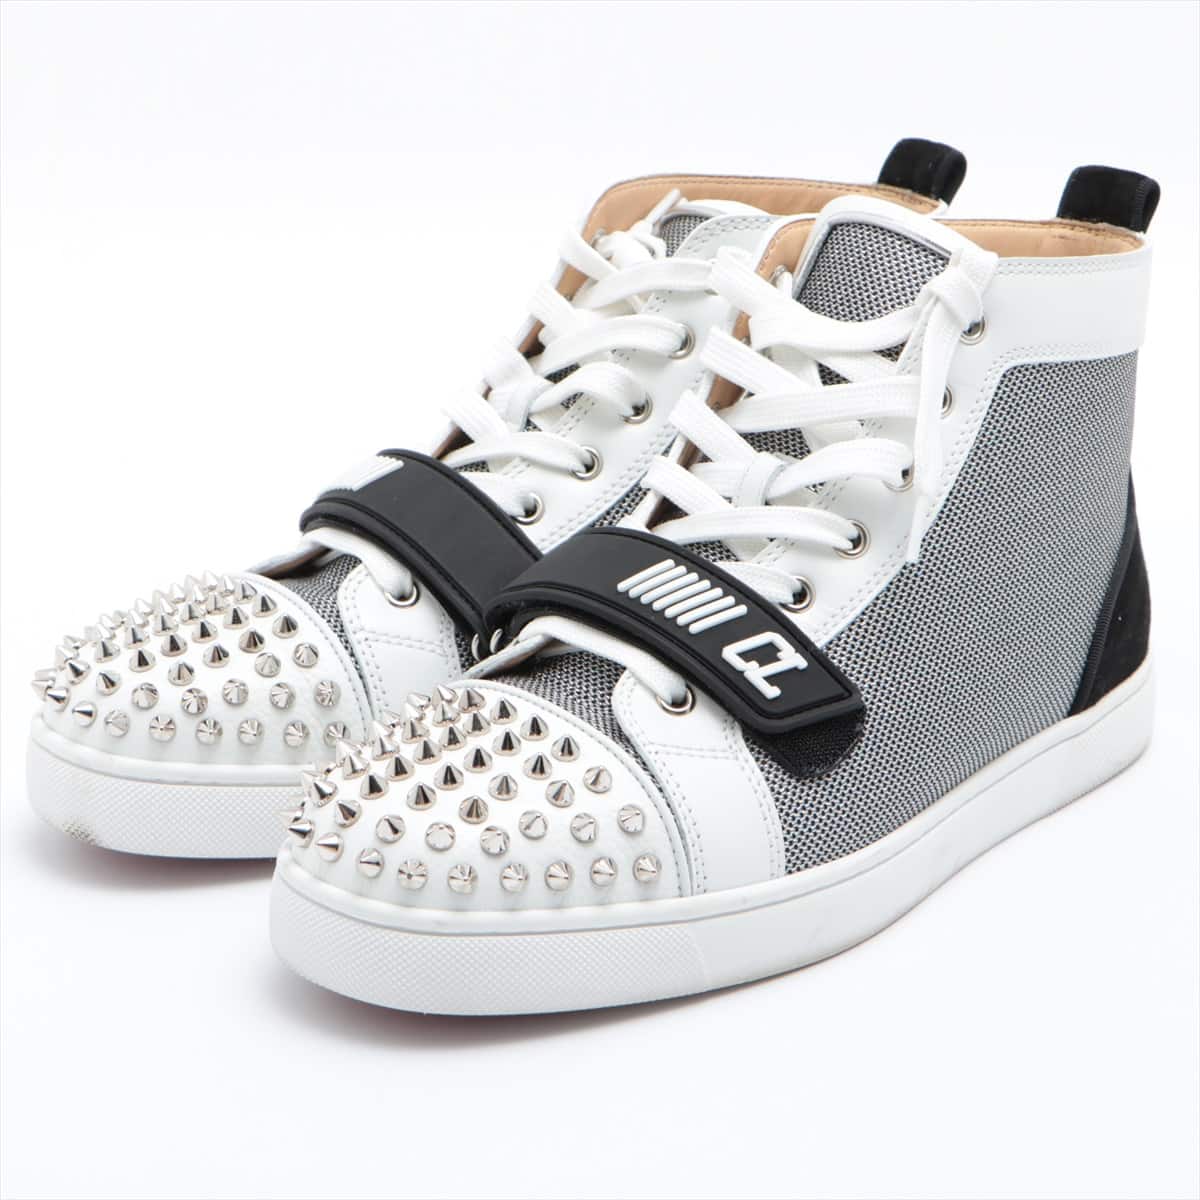 Christian Louboutin Lewis Spike Canvas & leather High-top Sneakers 42 Men's Black × White Spike Studs